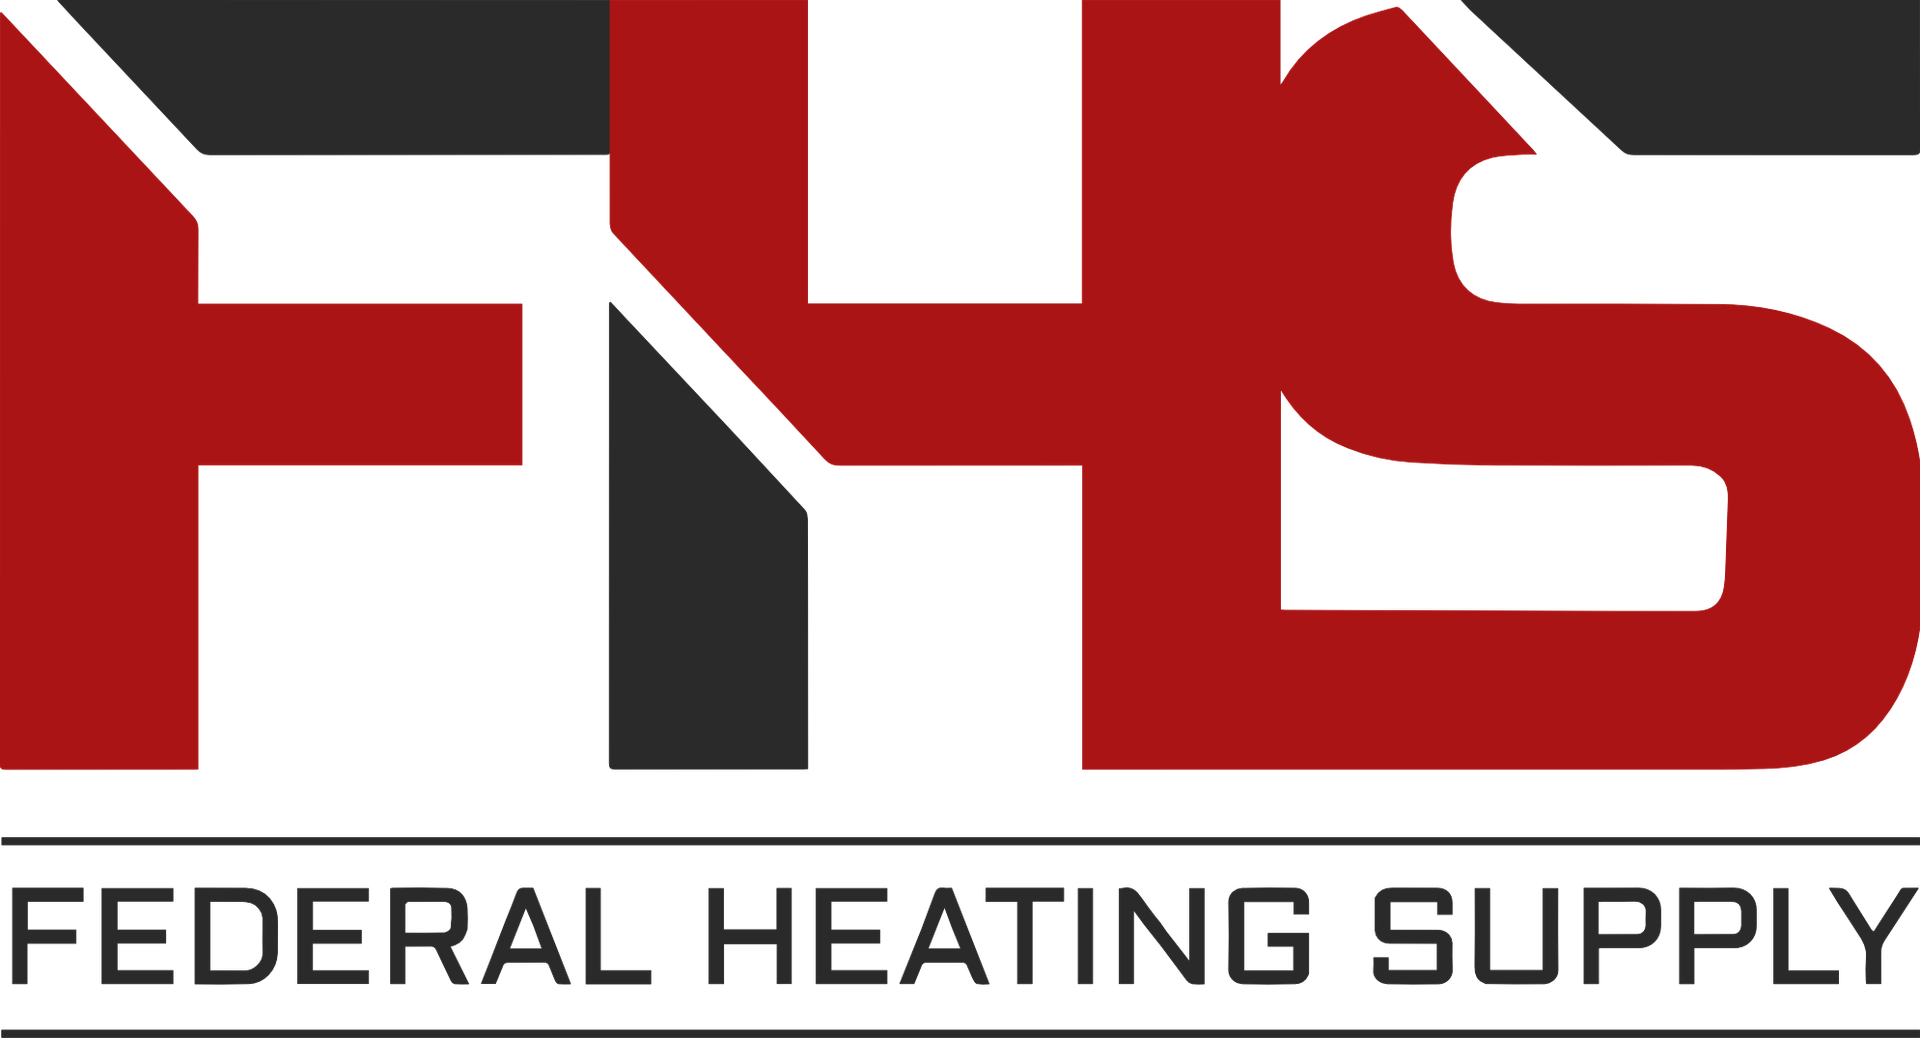 Federal Heating Supply - Coming Soon